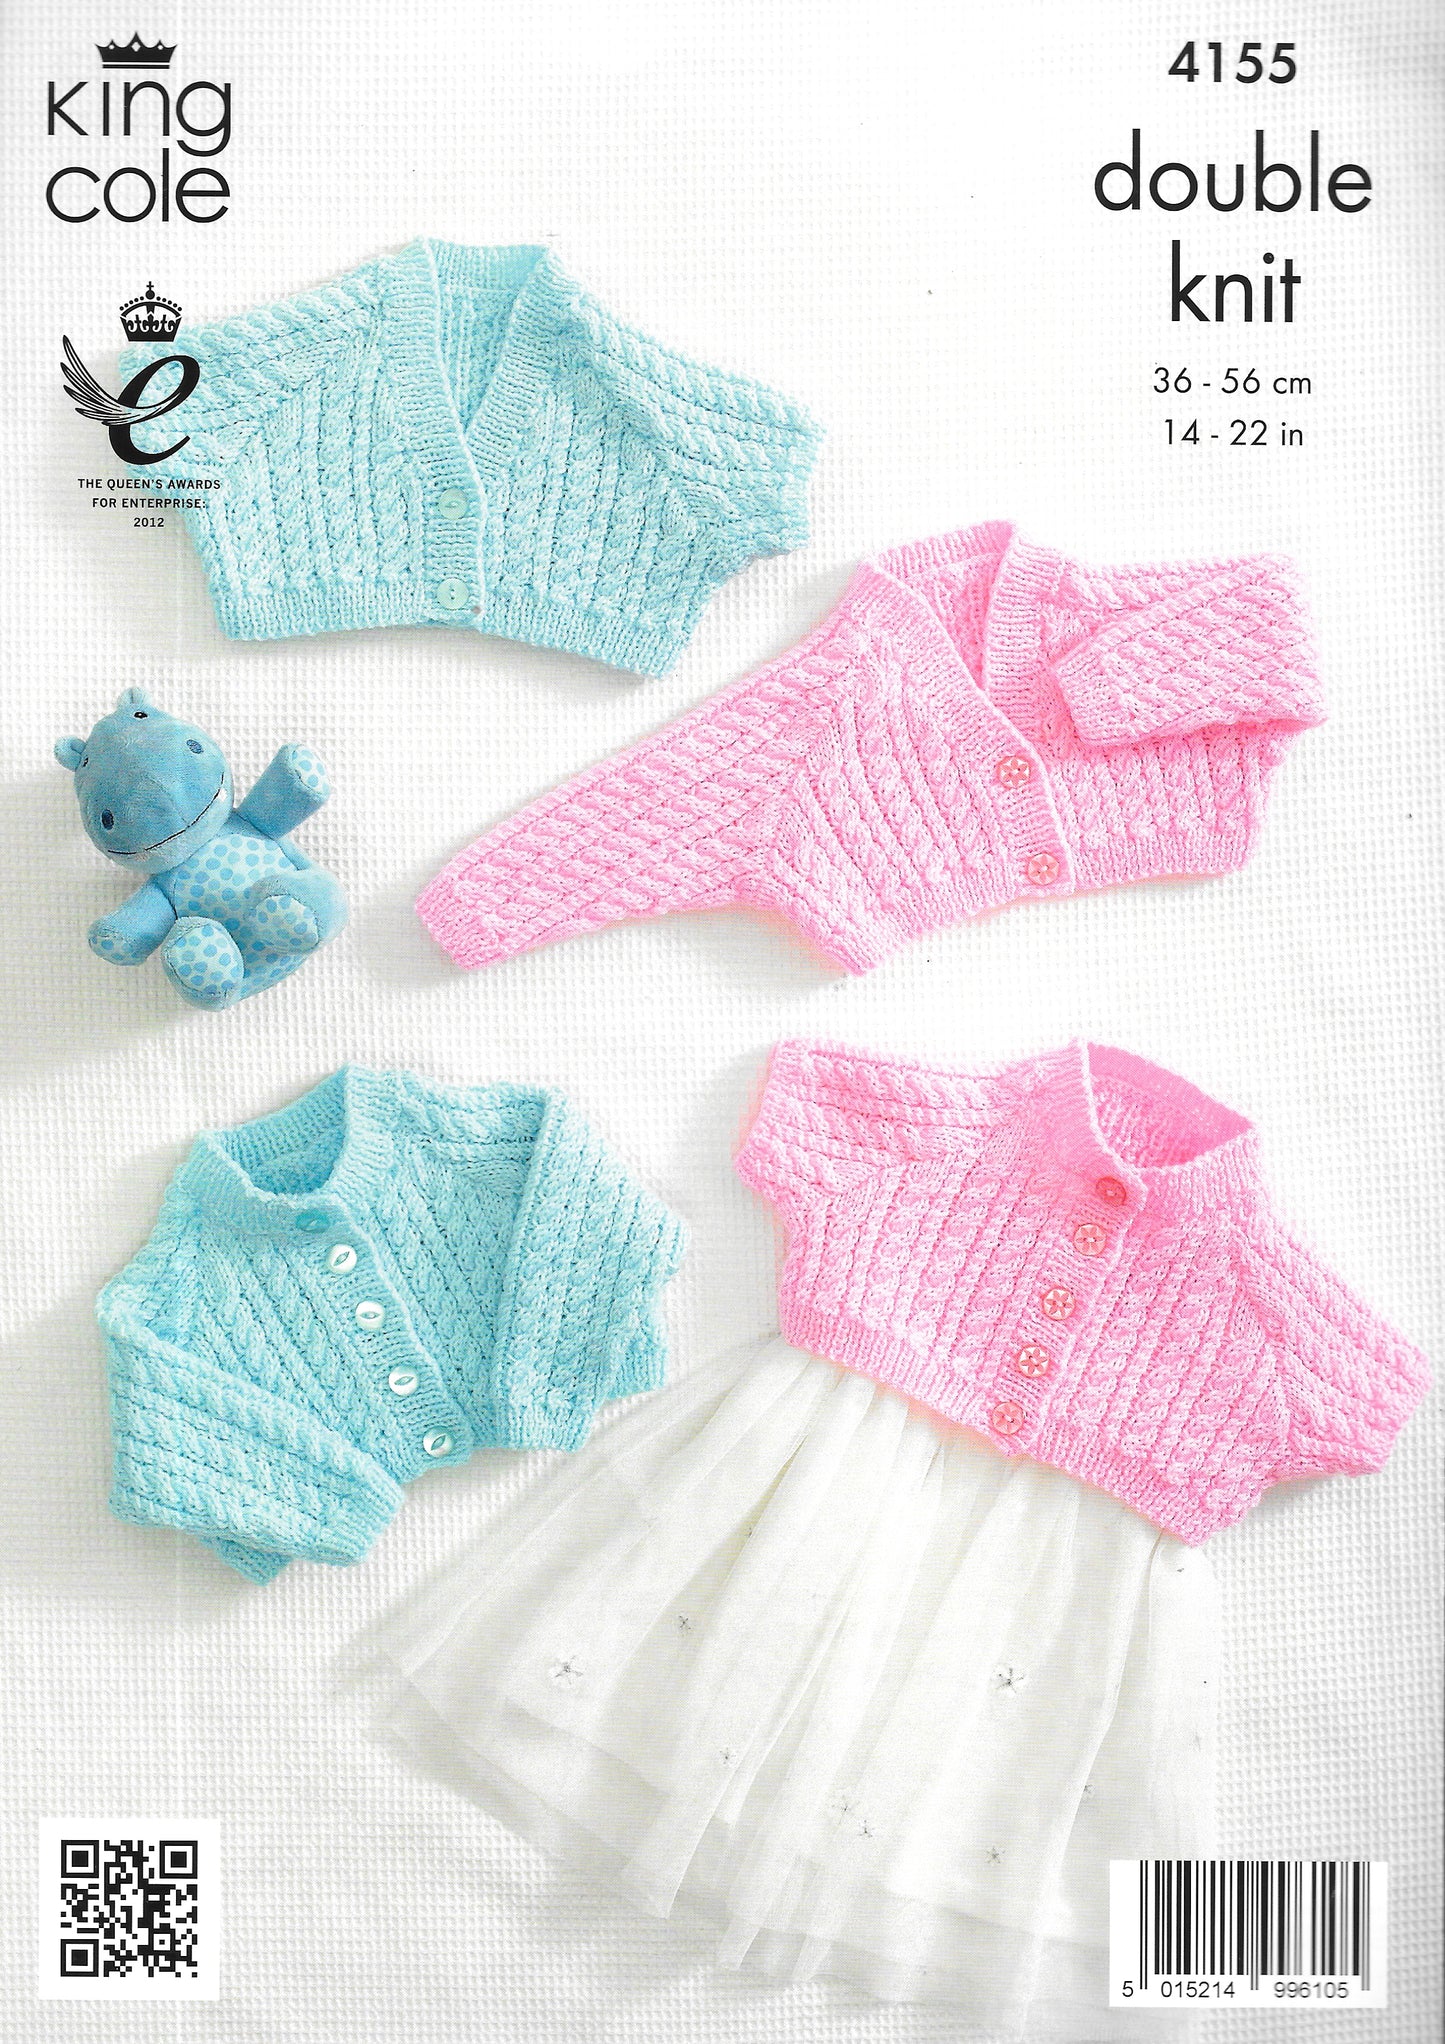 4155 King Cole Knitting Pattern. Baby Cardigans. Double Knit